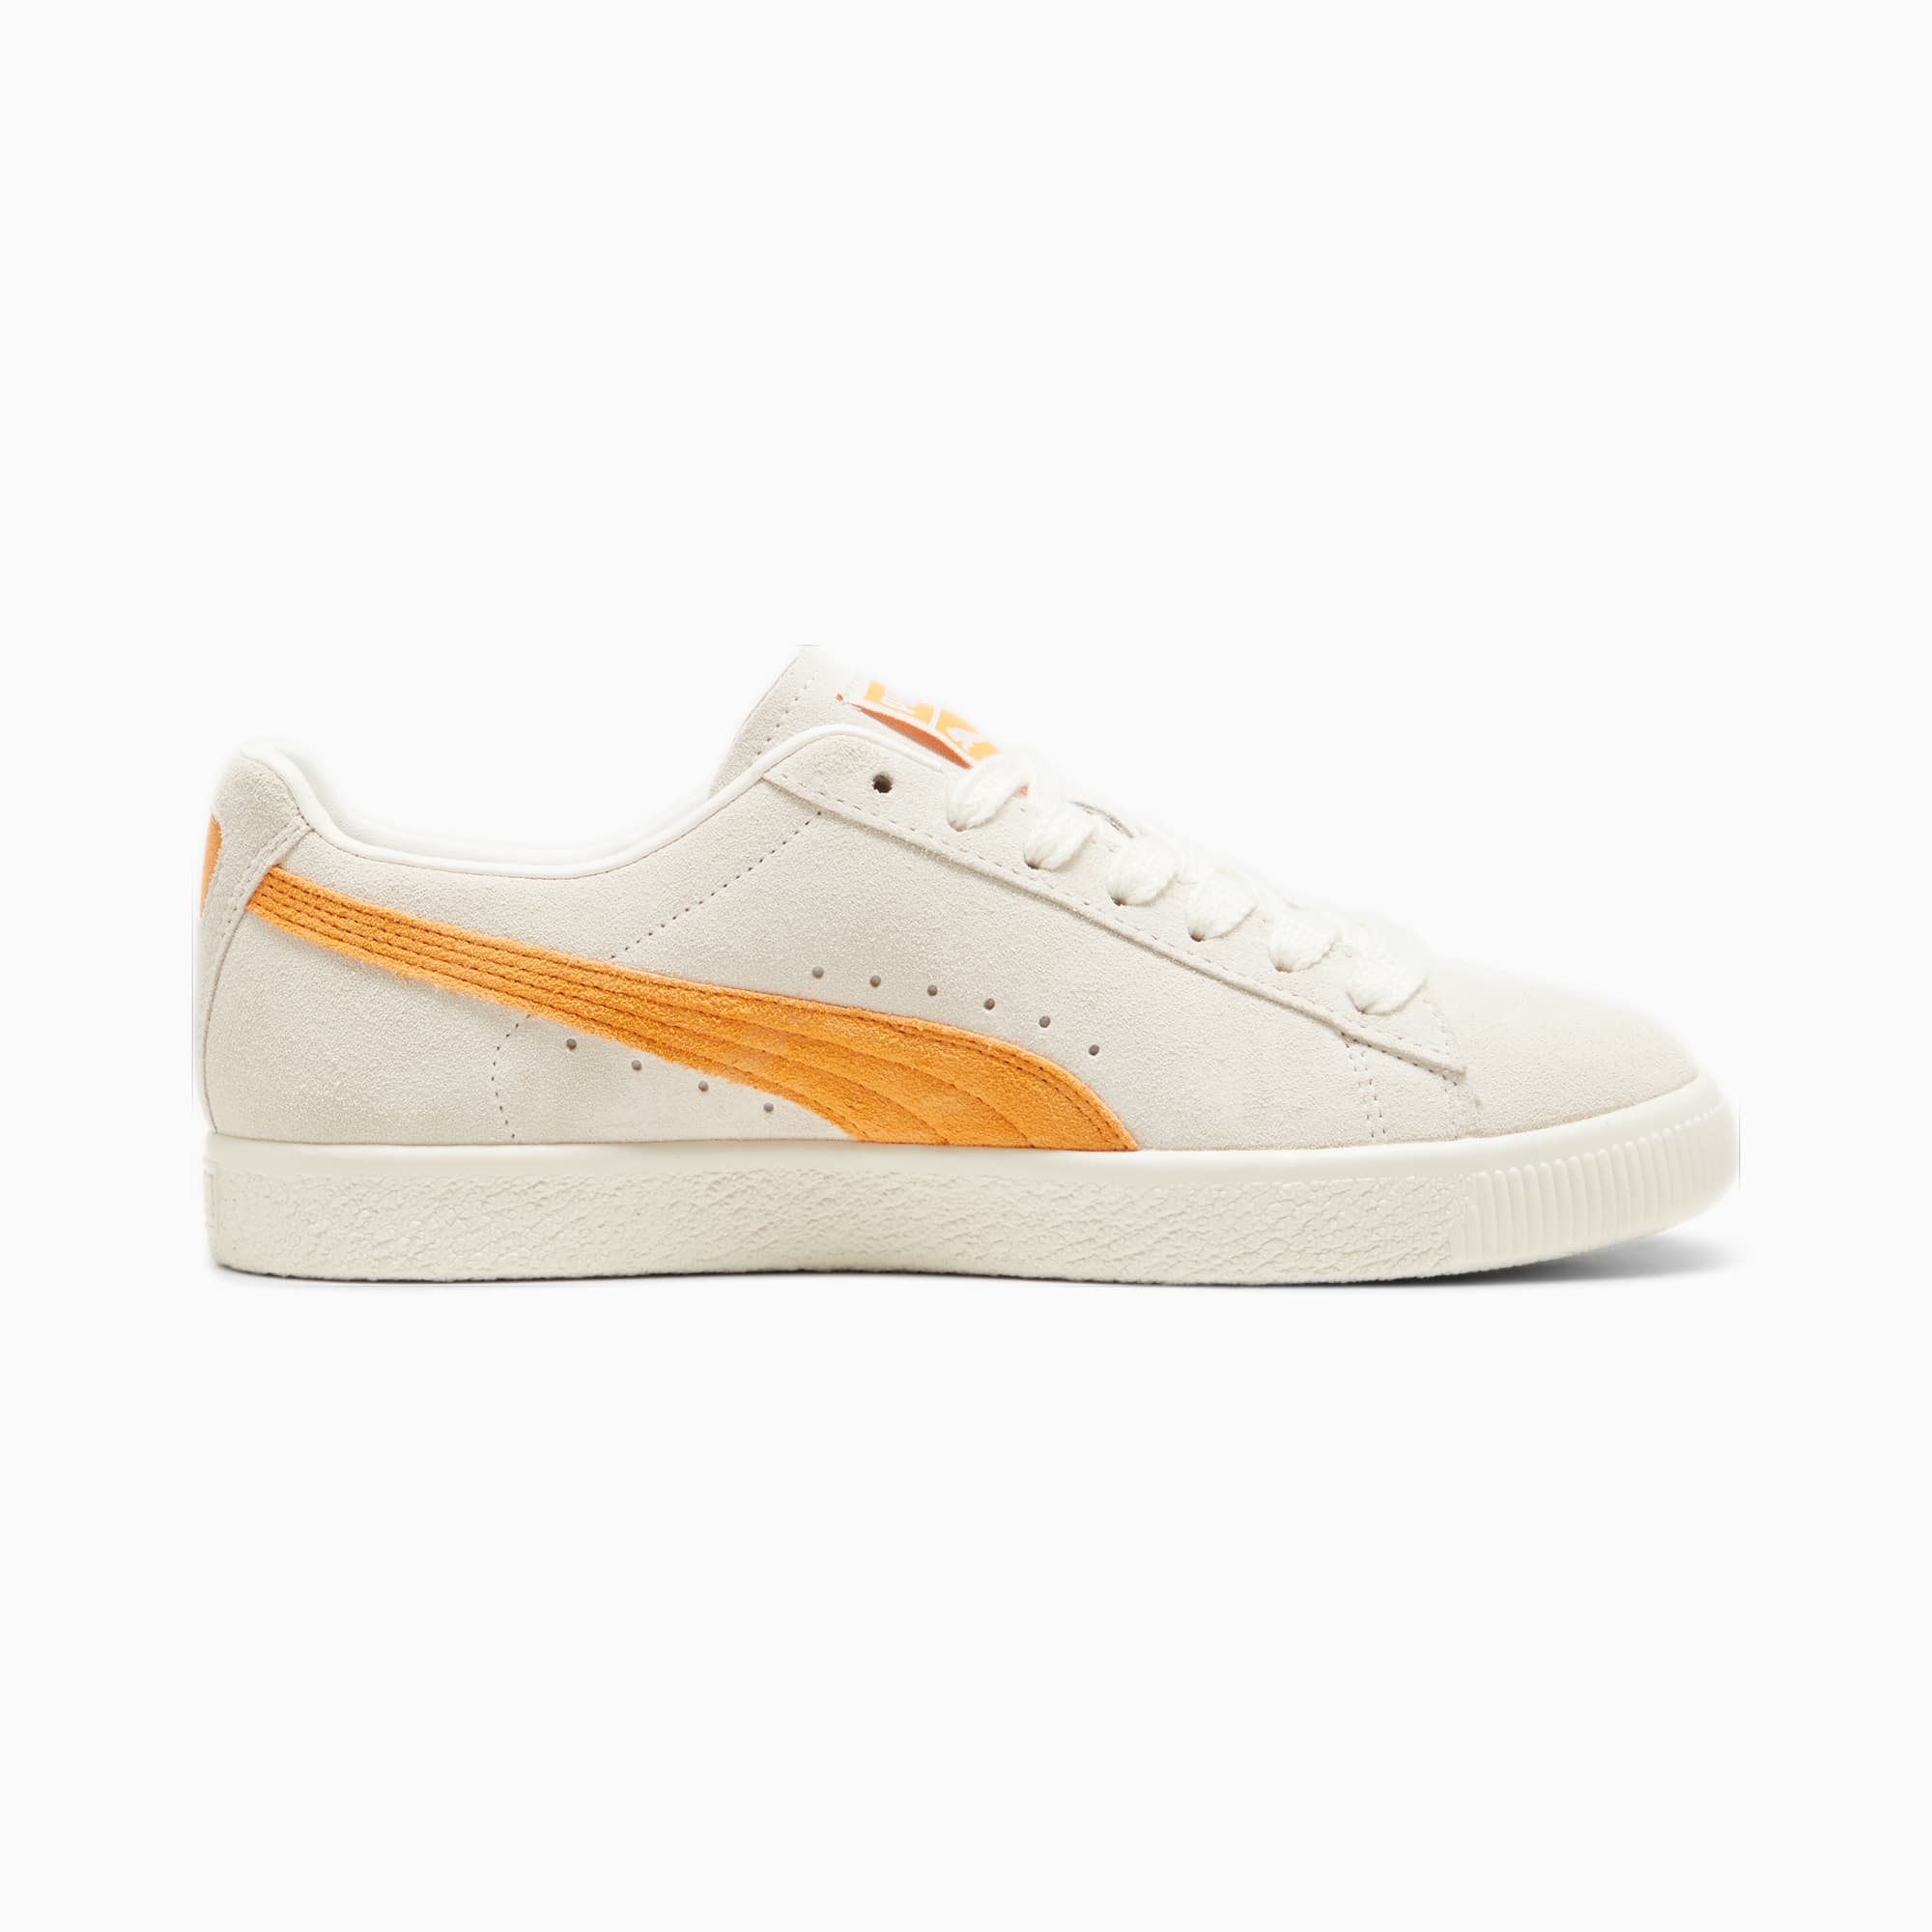 Women's PUMA Clyde OG Sneakers, Frosted Ivory/Clementine, Size 35,5, Shoes